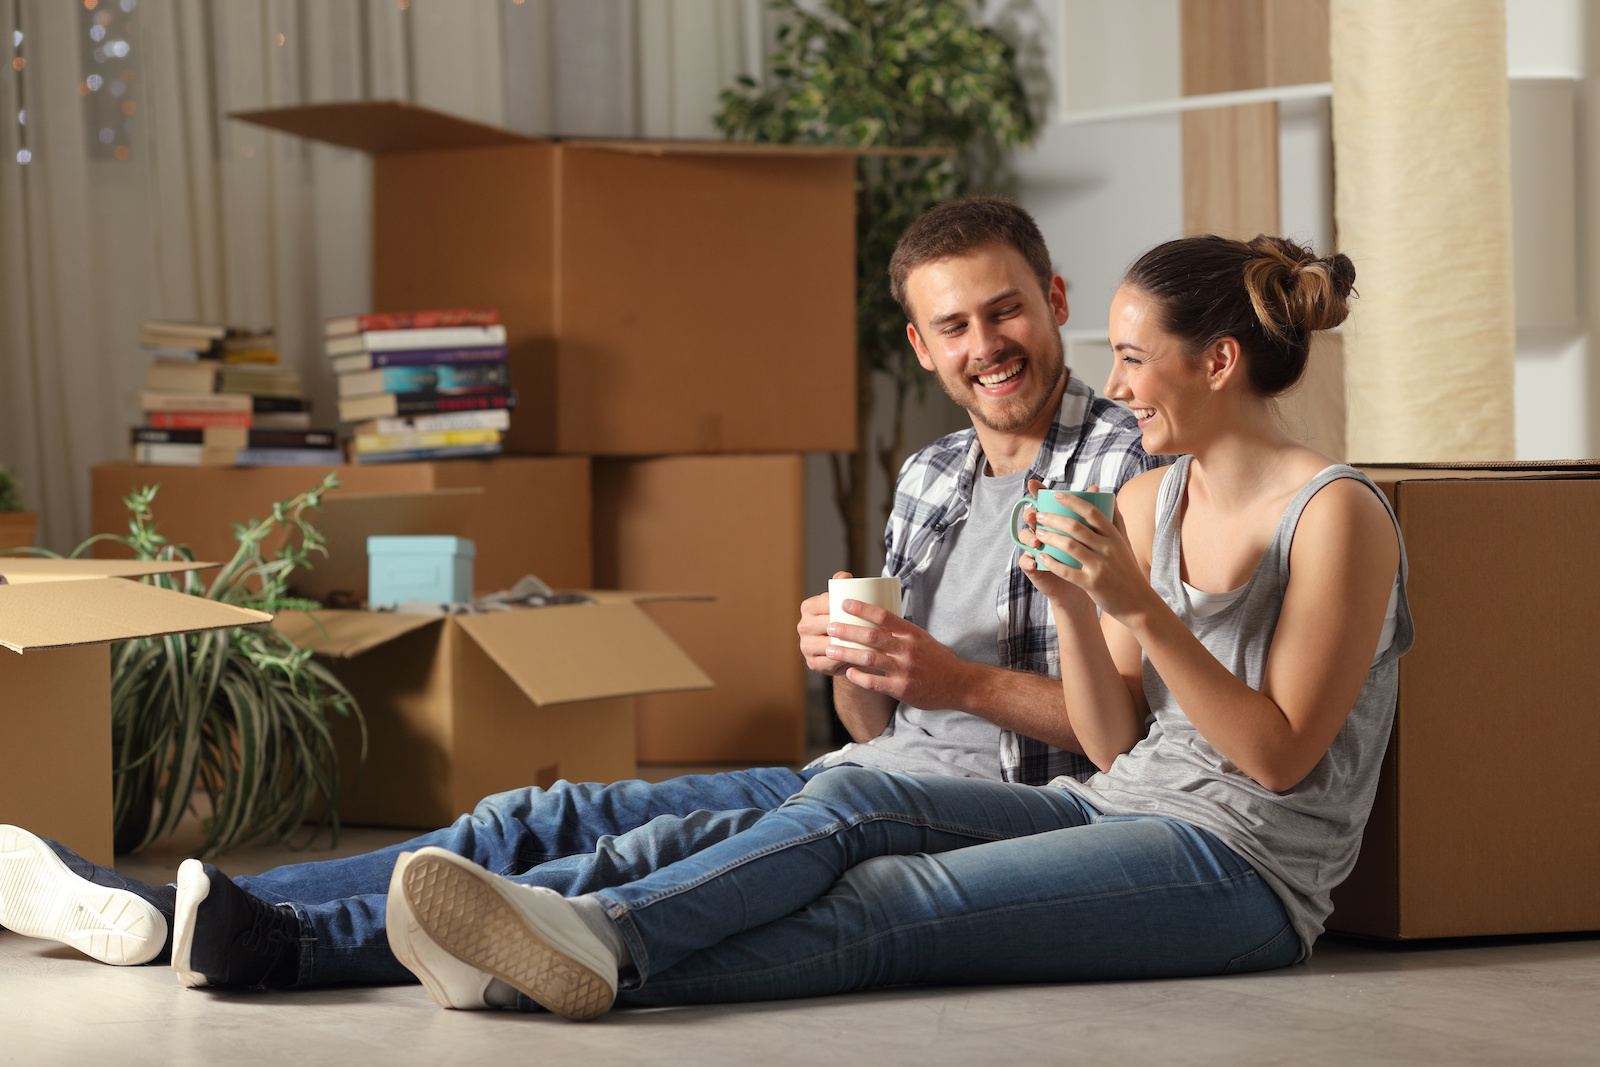 Five Common Problems with the House Buying Process and How to Mitigate Them